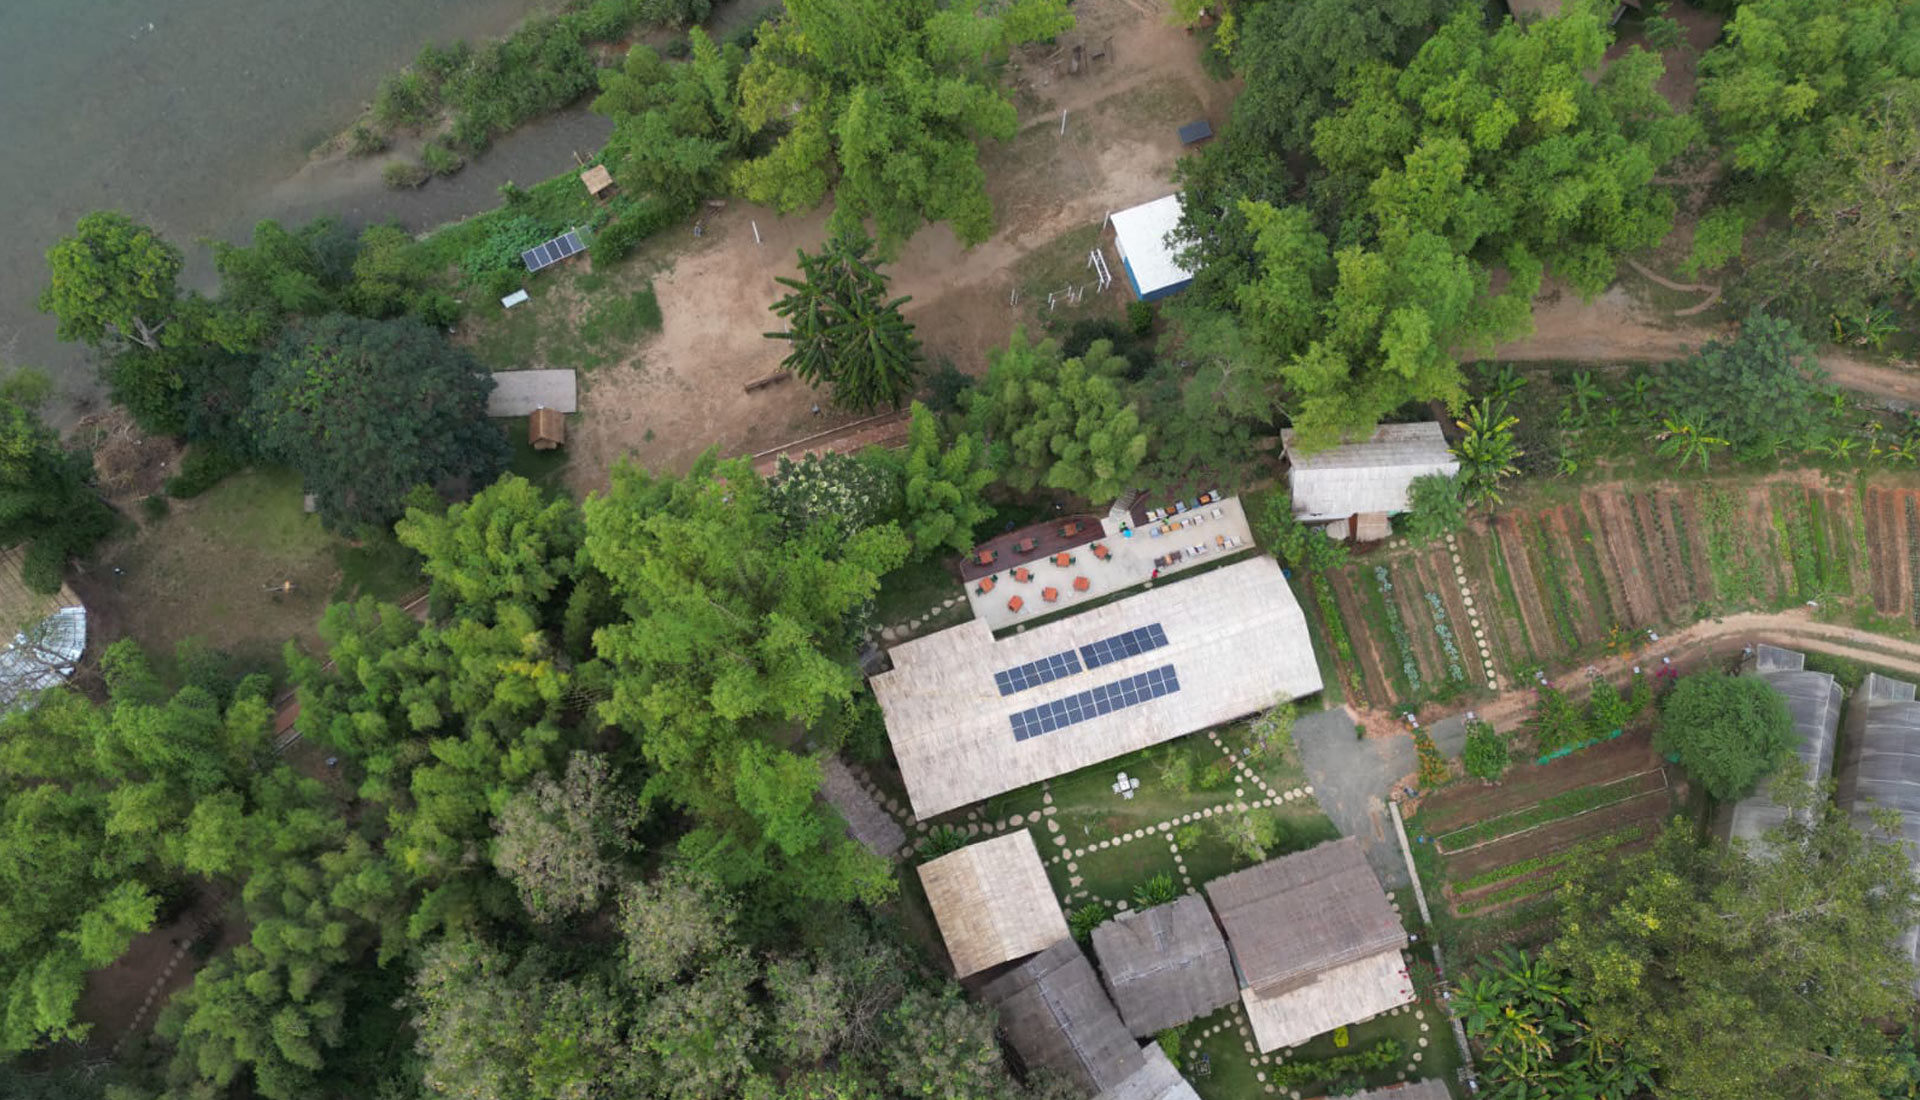 About: An aerial view of a house near a river.